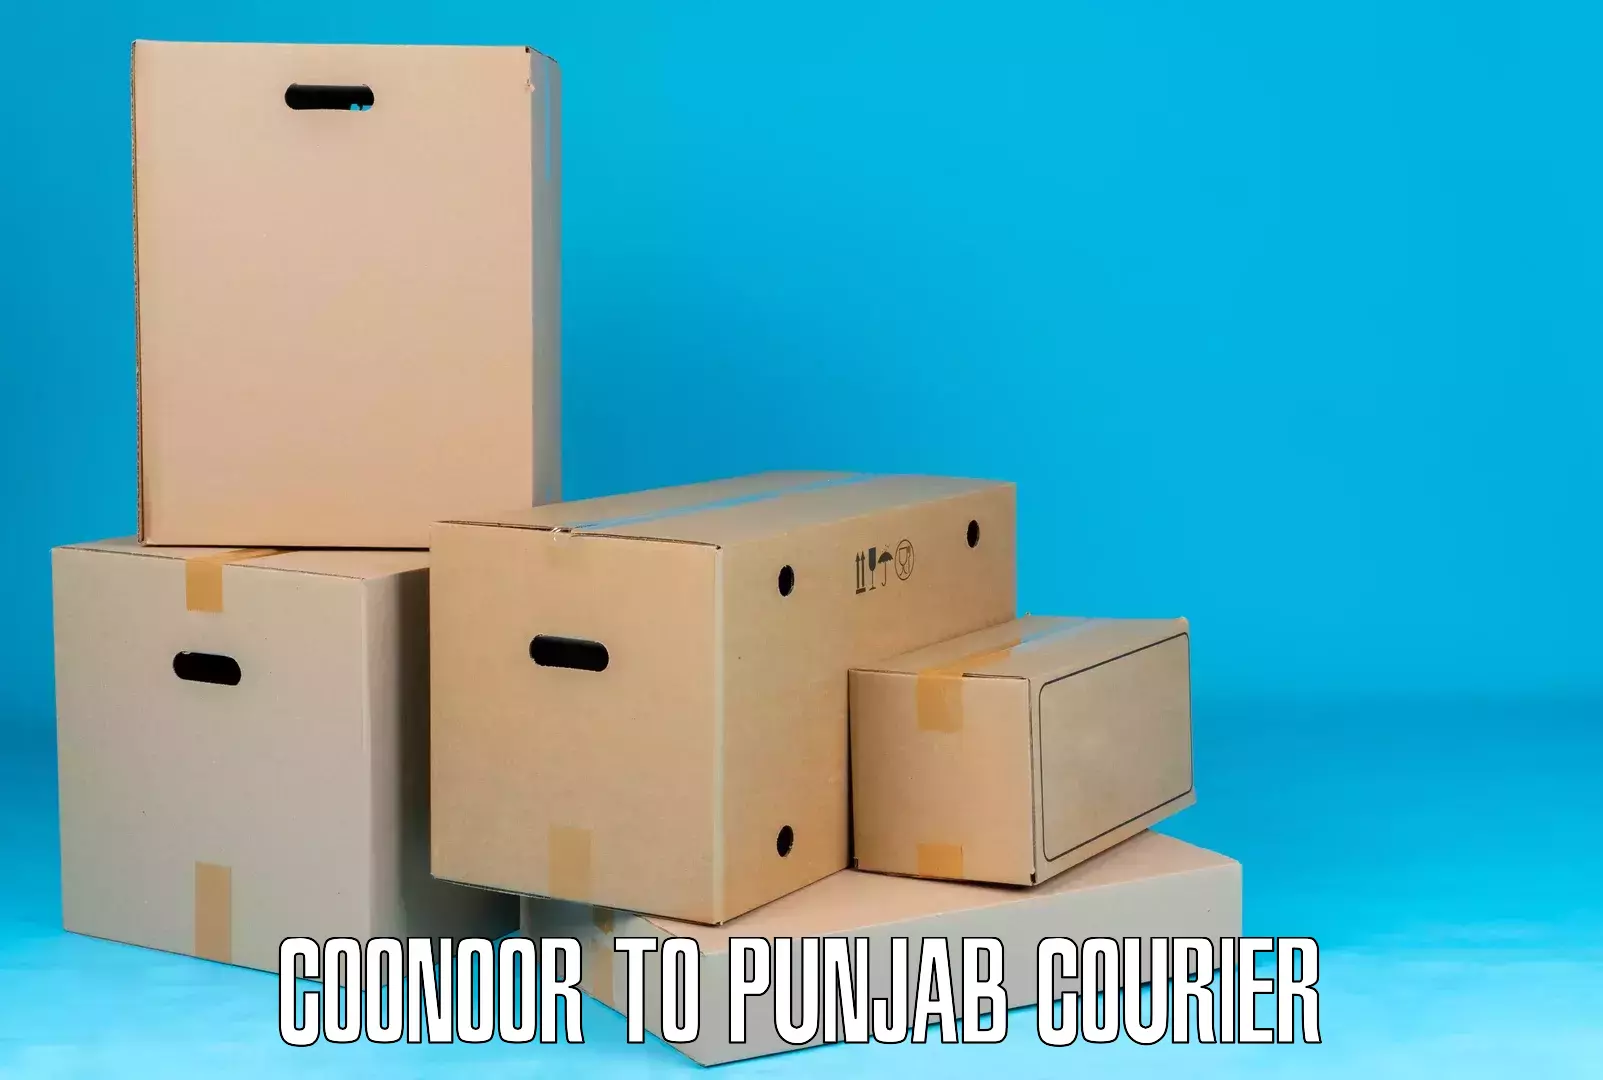 Customer-centric shipping in Coonoor to Patiala